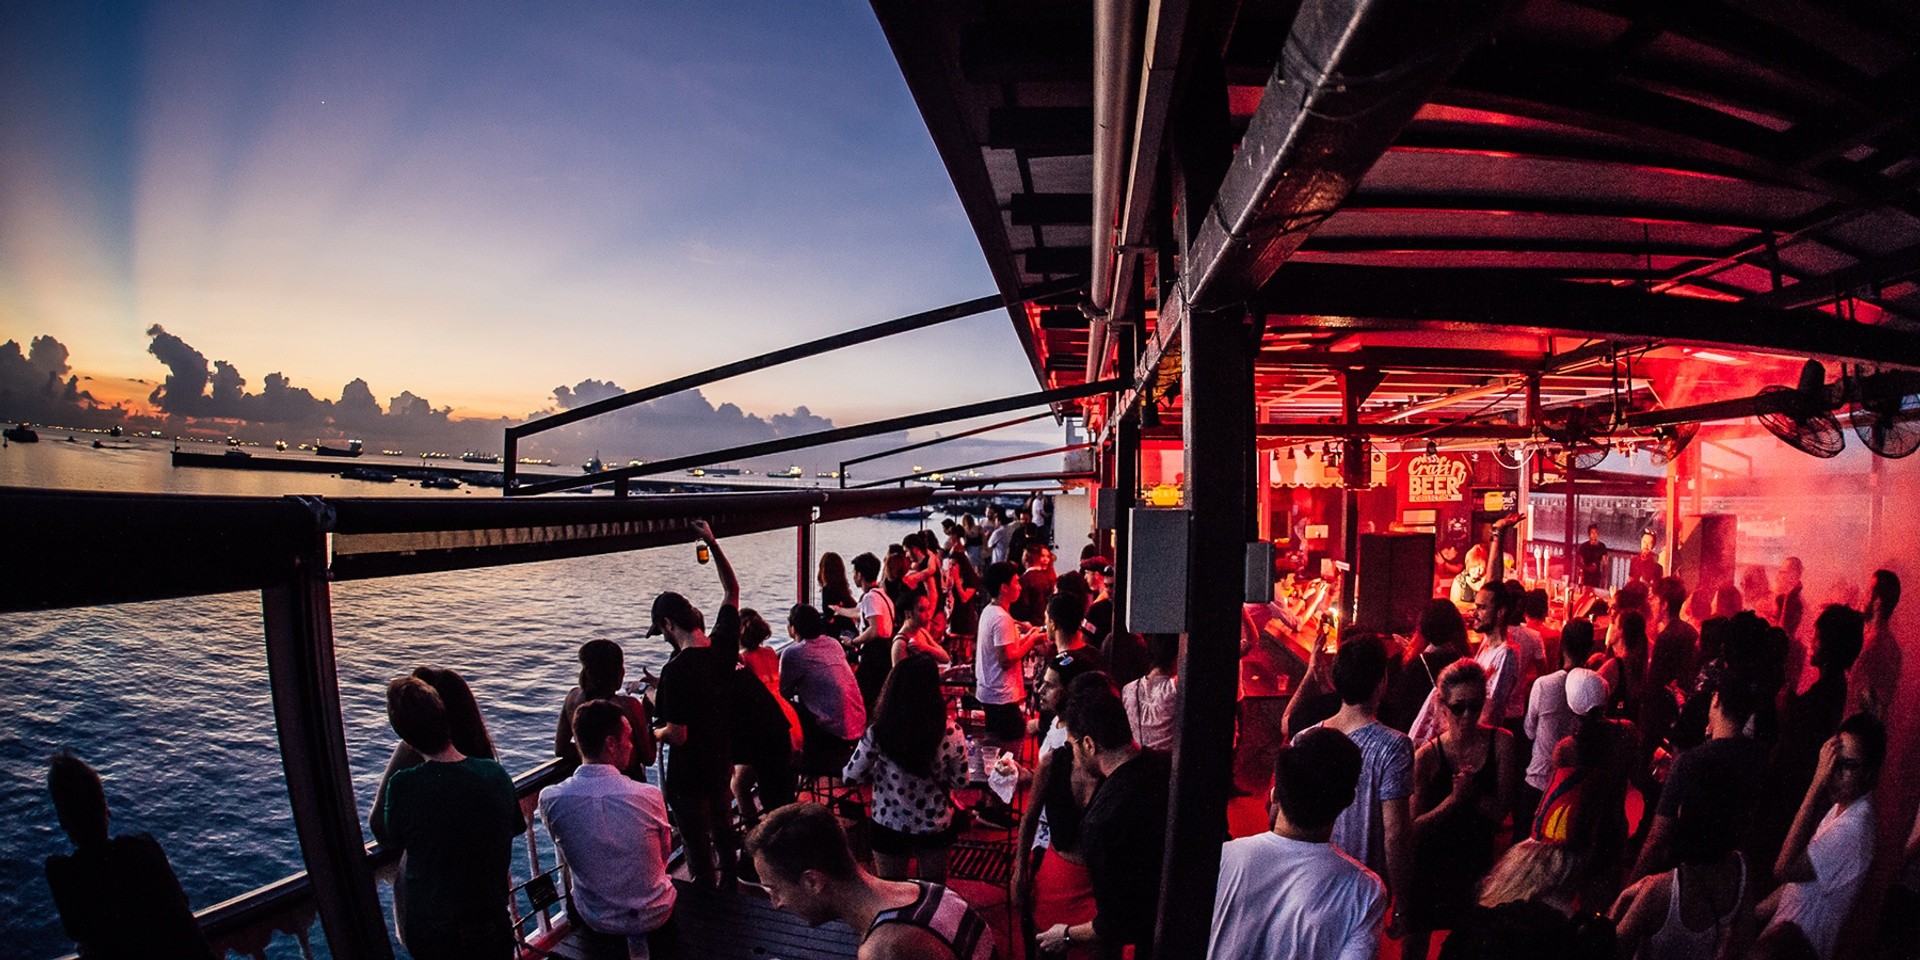 We're bringing back our overnight techno and house party on the Bandwagon Riverboat